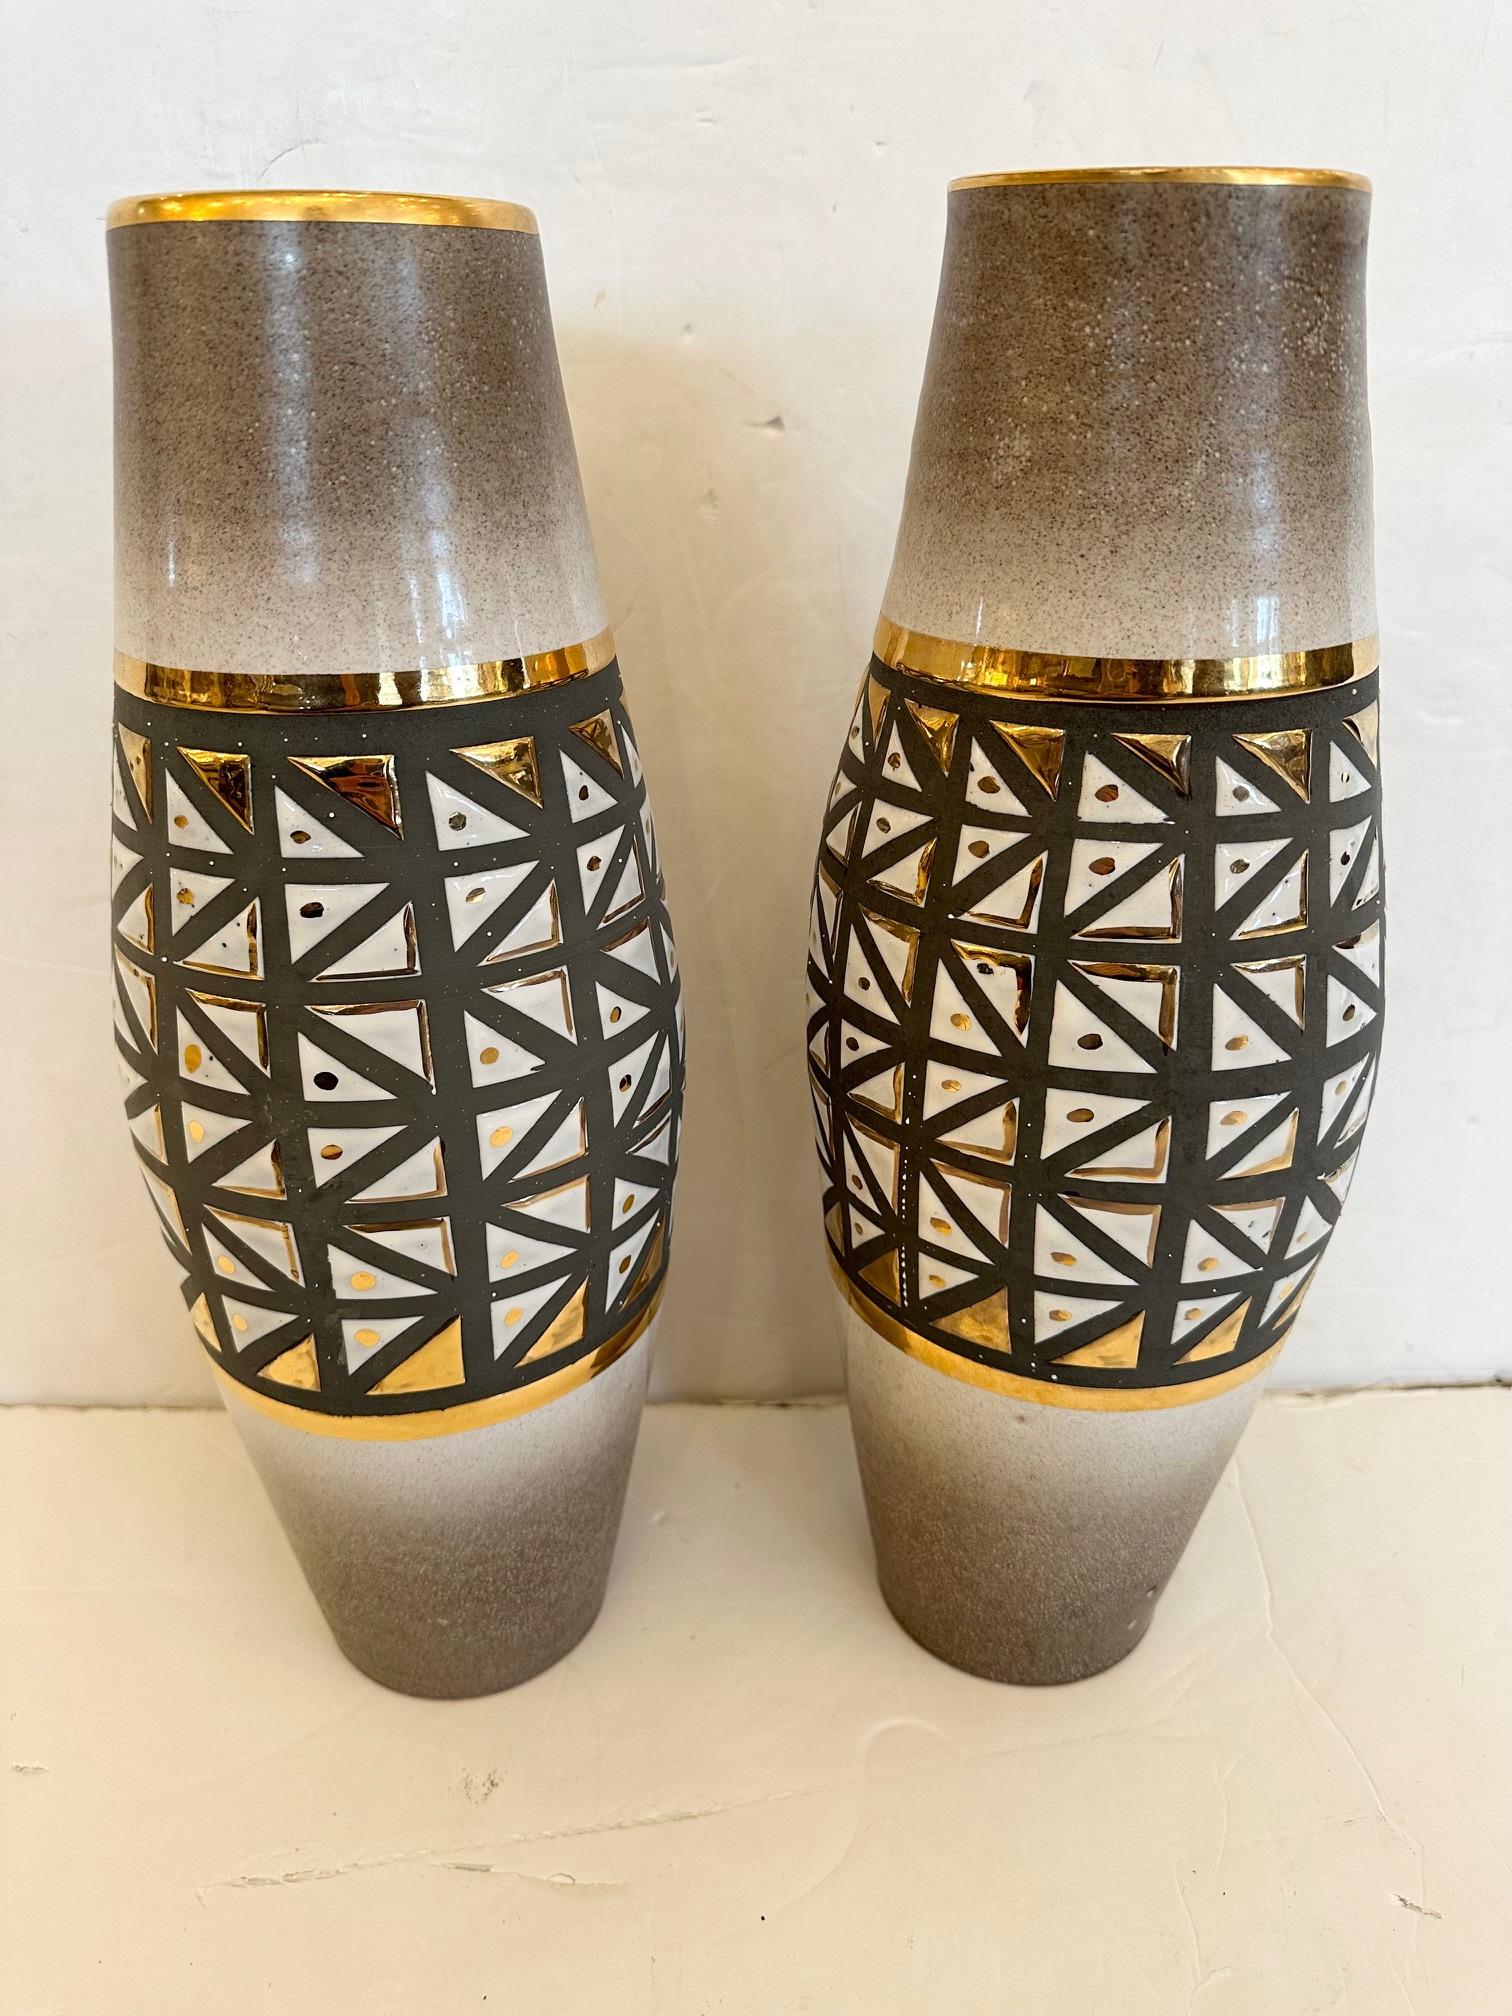 Beautiful pair of hand crafted midcentury modern pottery vases having gray & white geometric shapes with gold gilding accents.